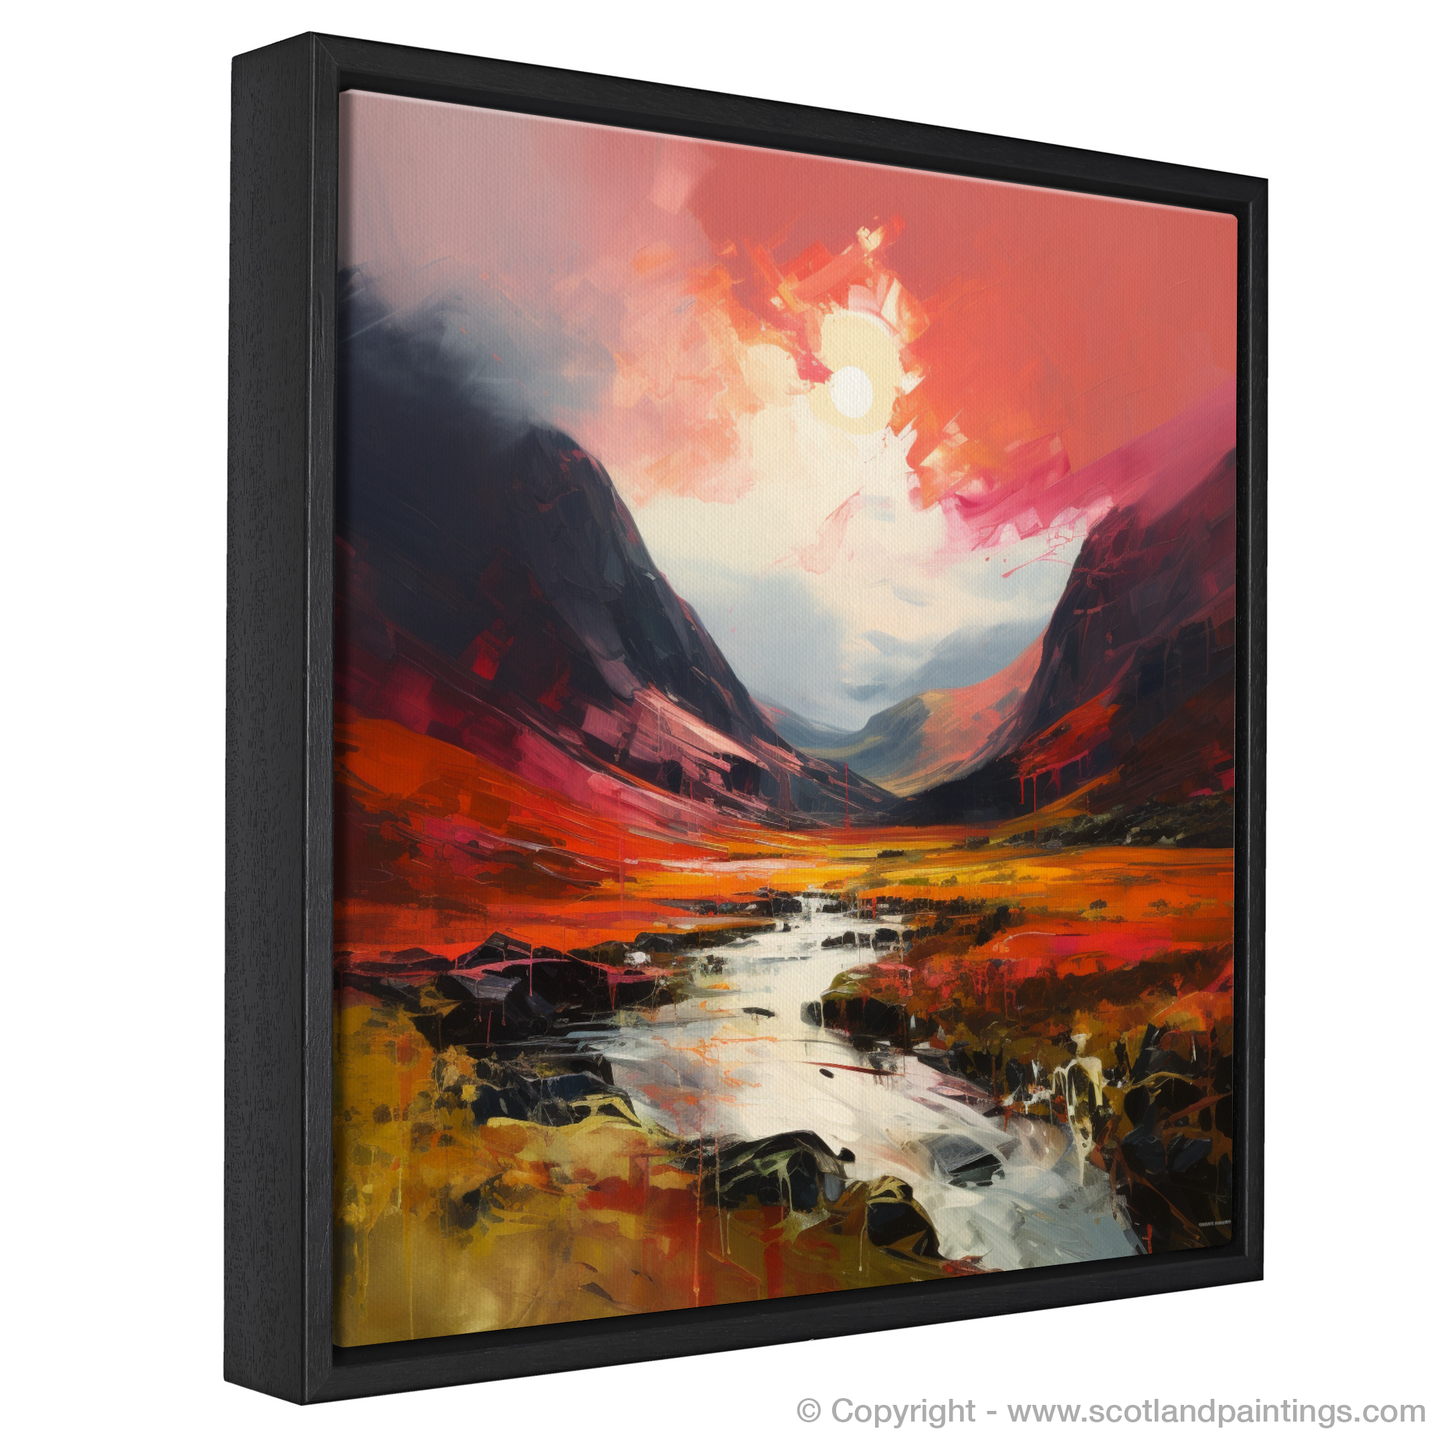 Painting and Art Print of Crimson clouds over valley in Glencoe entitled "Crimson Skies Over Glencoe Valley".